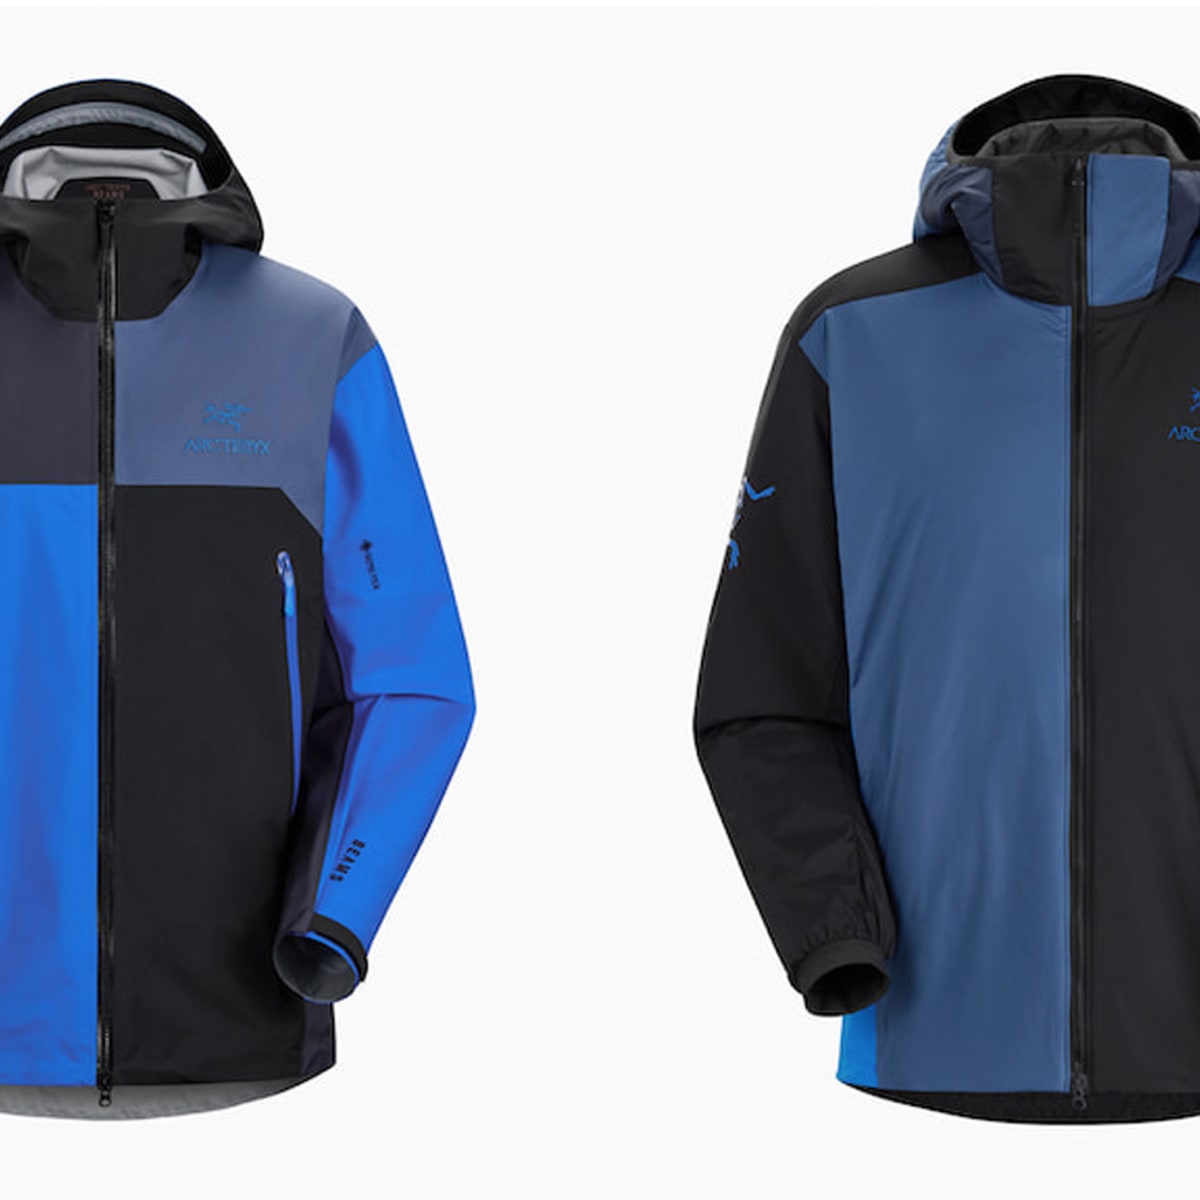 Arc'teryx and Beams release their second global collaboration Acquire